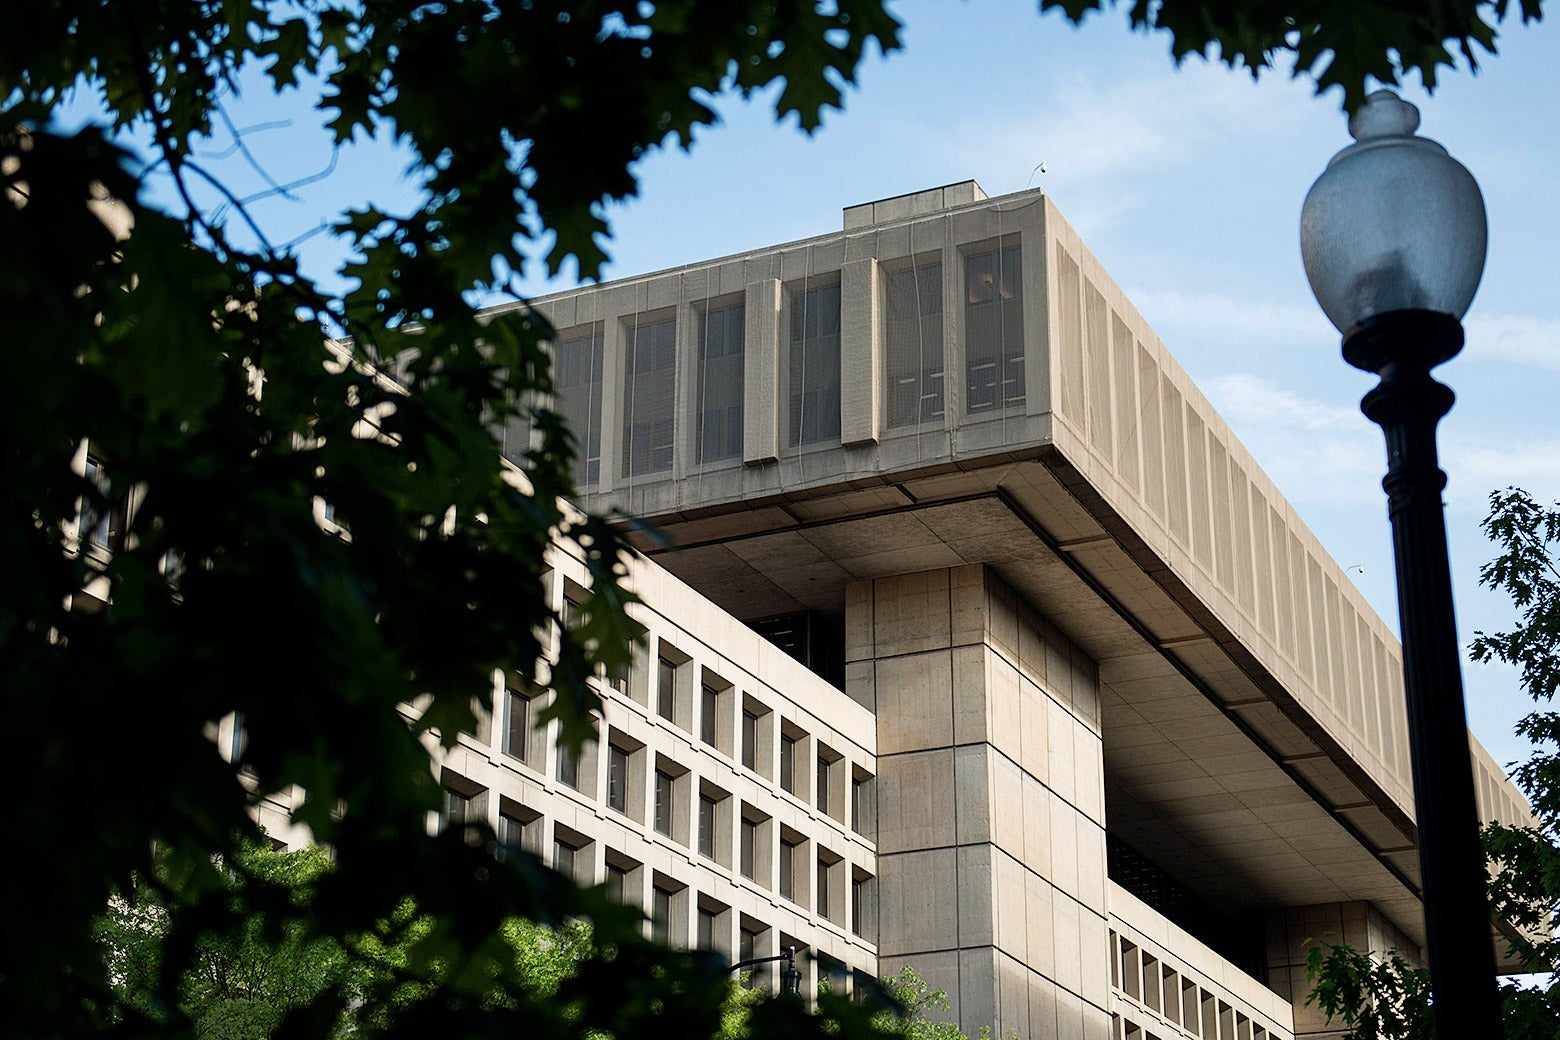 A view of the J. Edgar Hoover Building, the headquarters for the Federal Bureau of Investigation.